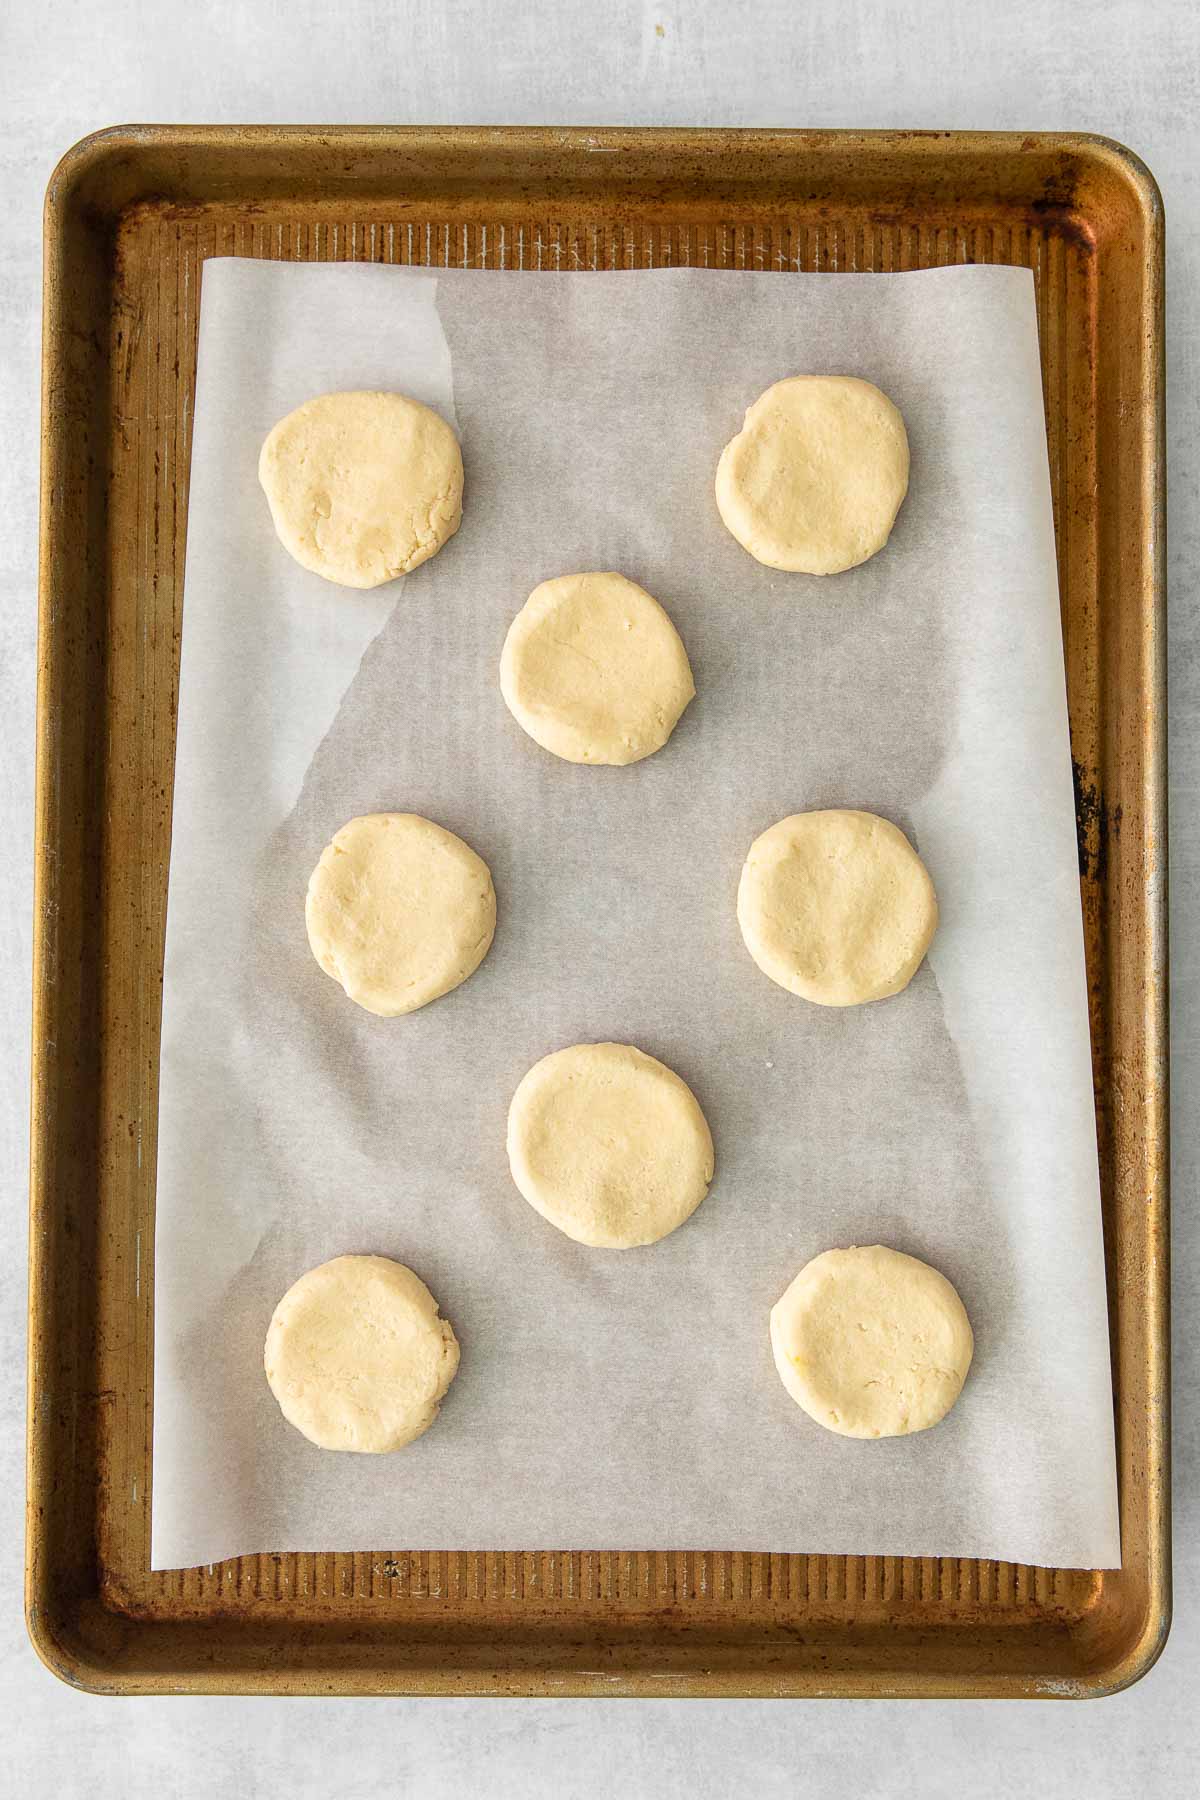 eight uncooked shortbread cookies on a parchment lined baking sheet.